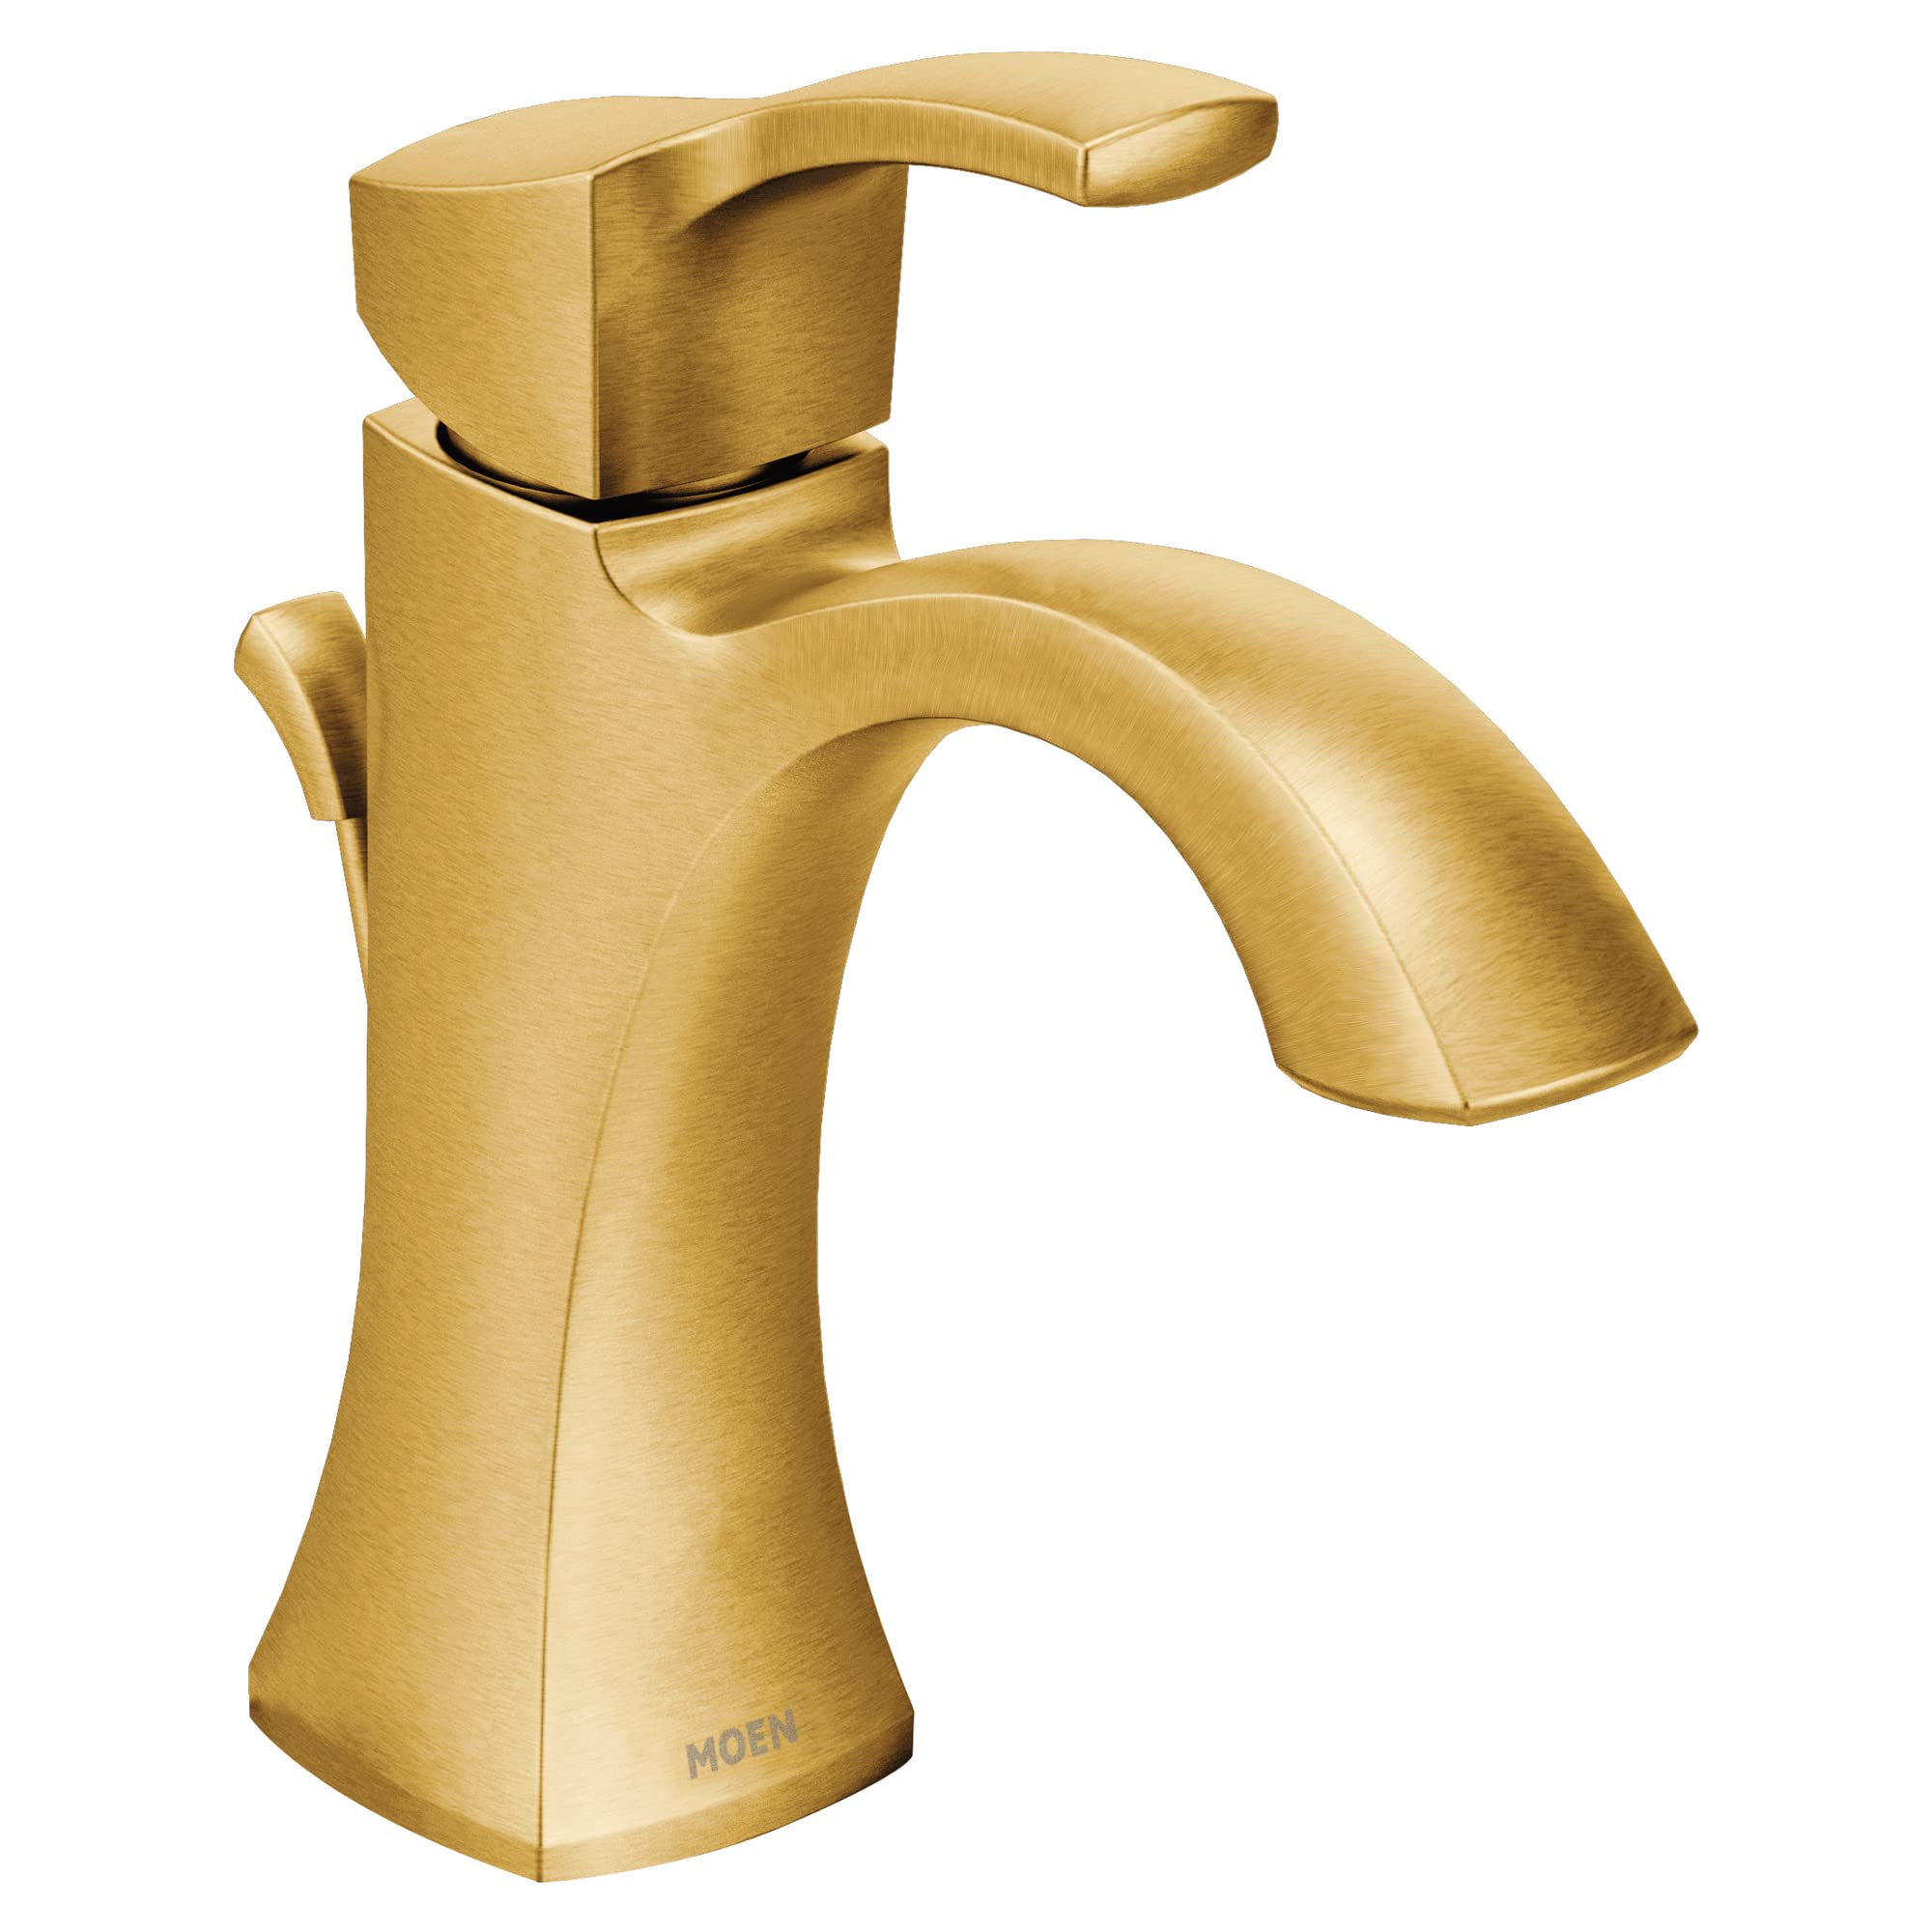 Moen Voss Brushed Gold One-Handle High Arc Bathroom Faucet with Drain Assembly, 6903BG